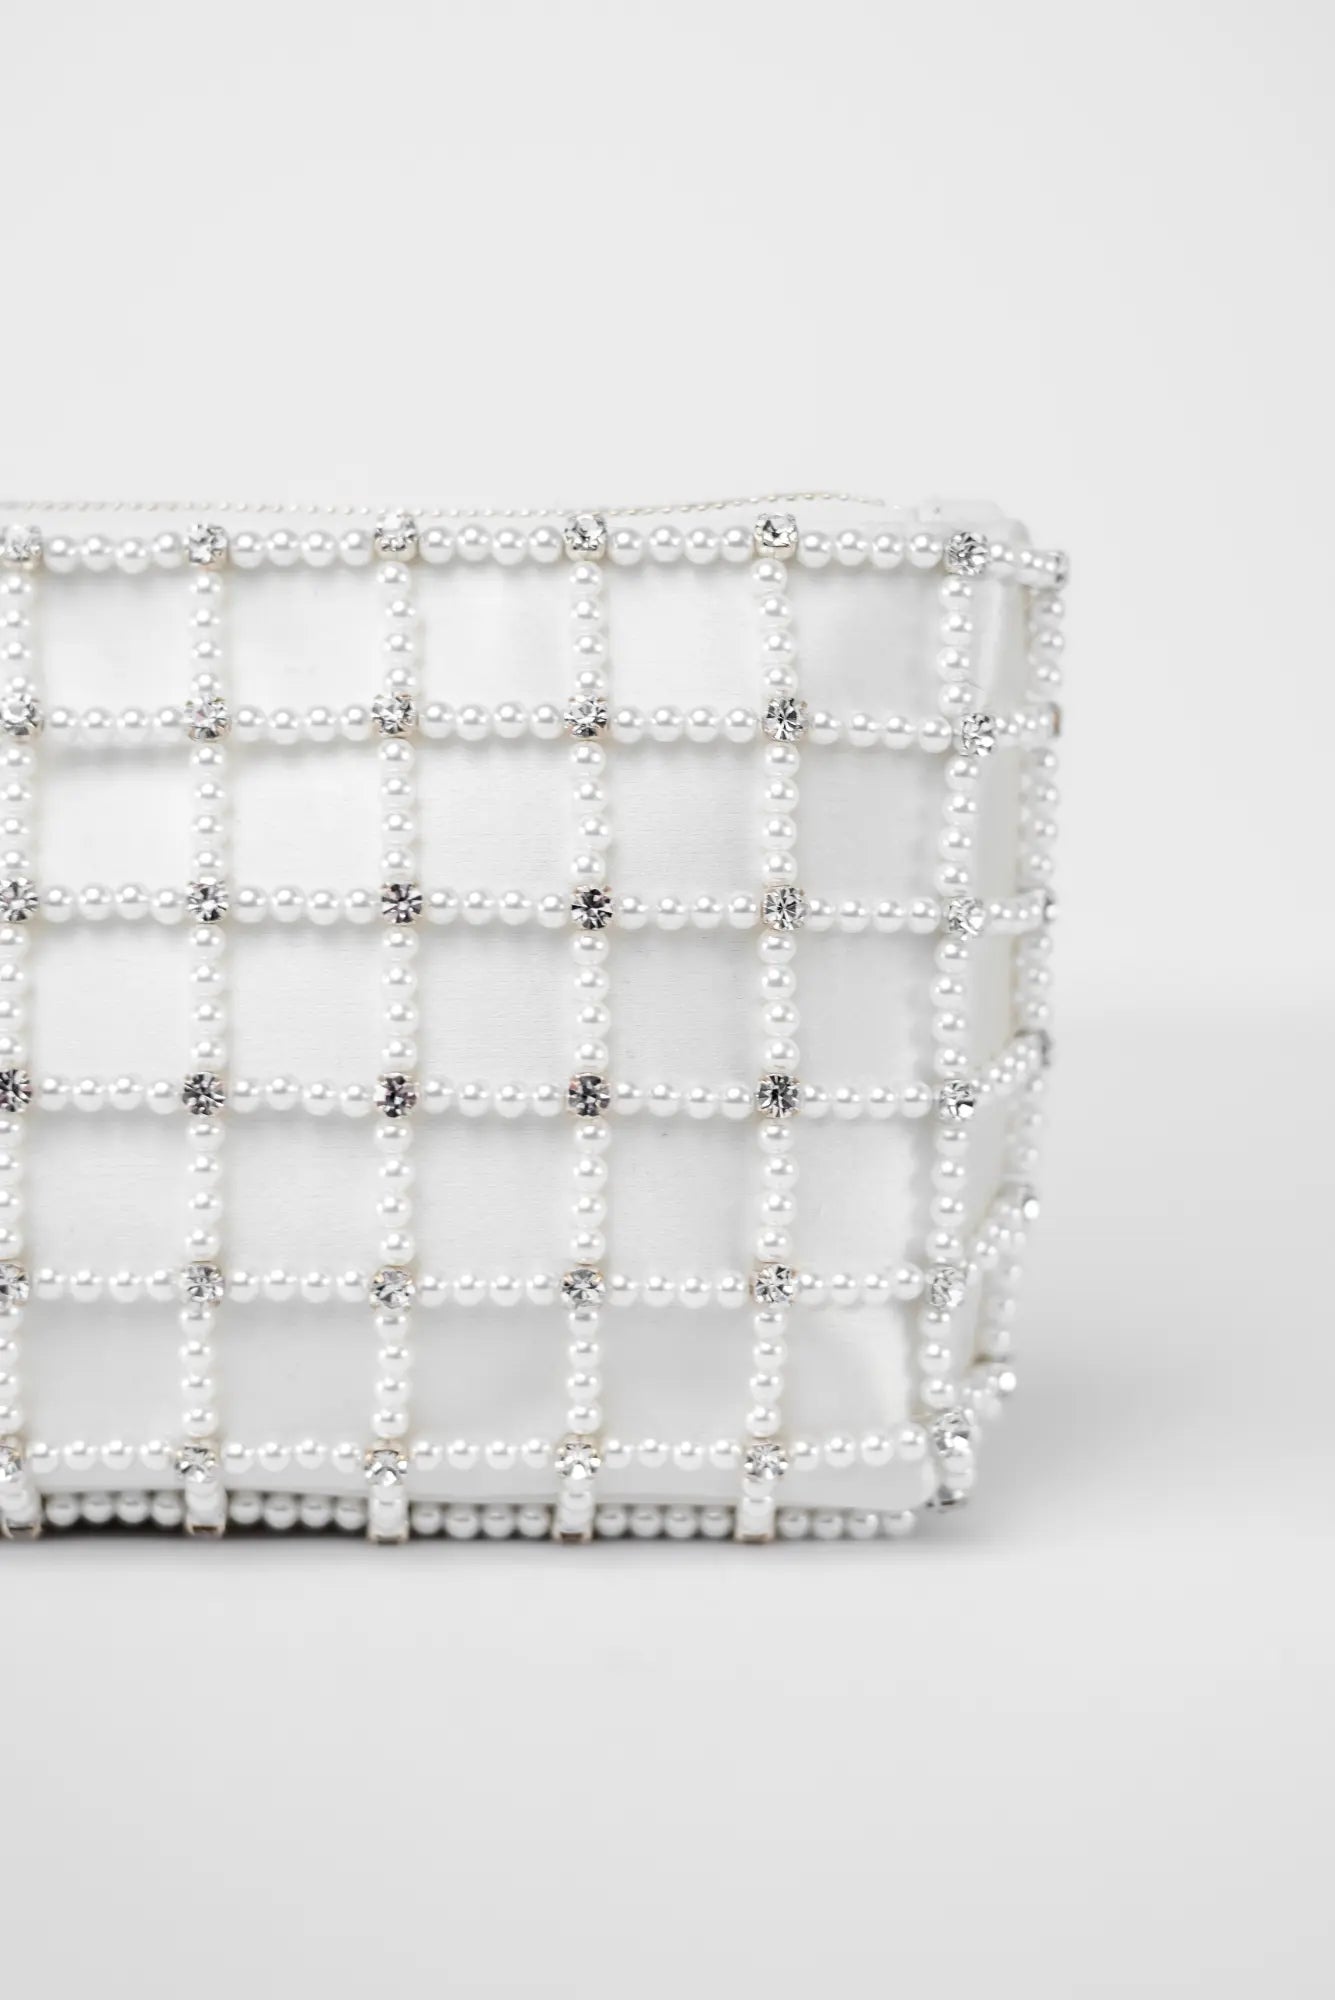 The Bella Rosa Collection Hayden Clutch - Pearl Cage featuring pearl beading and silver accents on a white background, showcasing Italian craftsmanship.